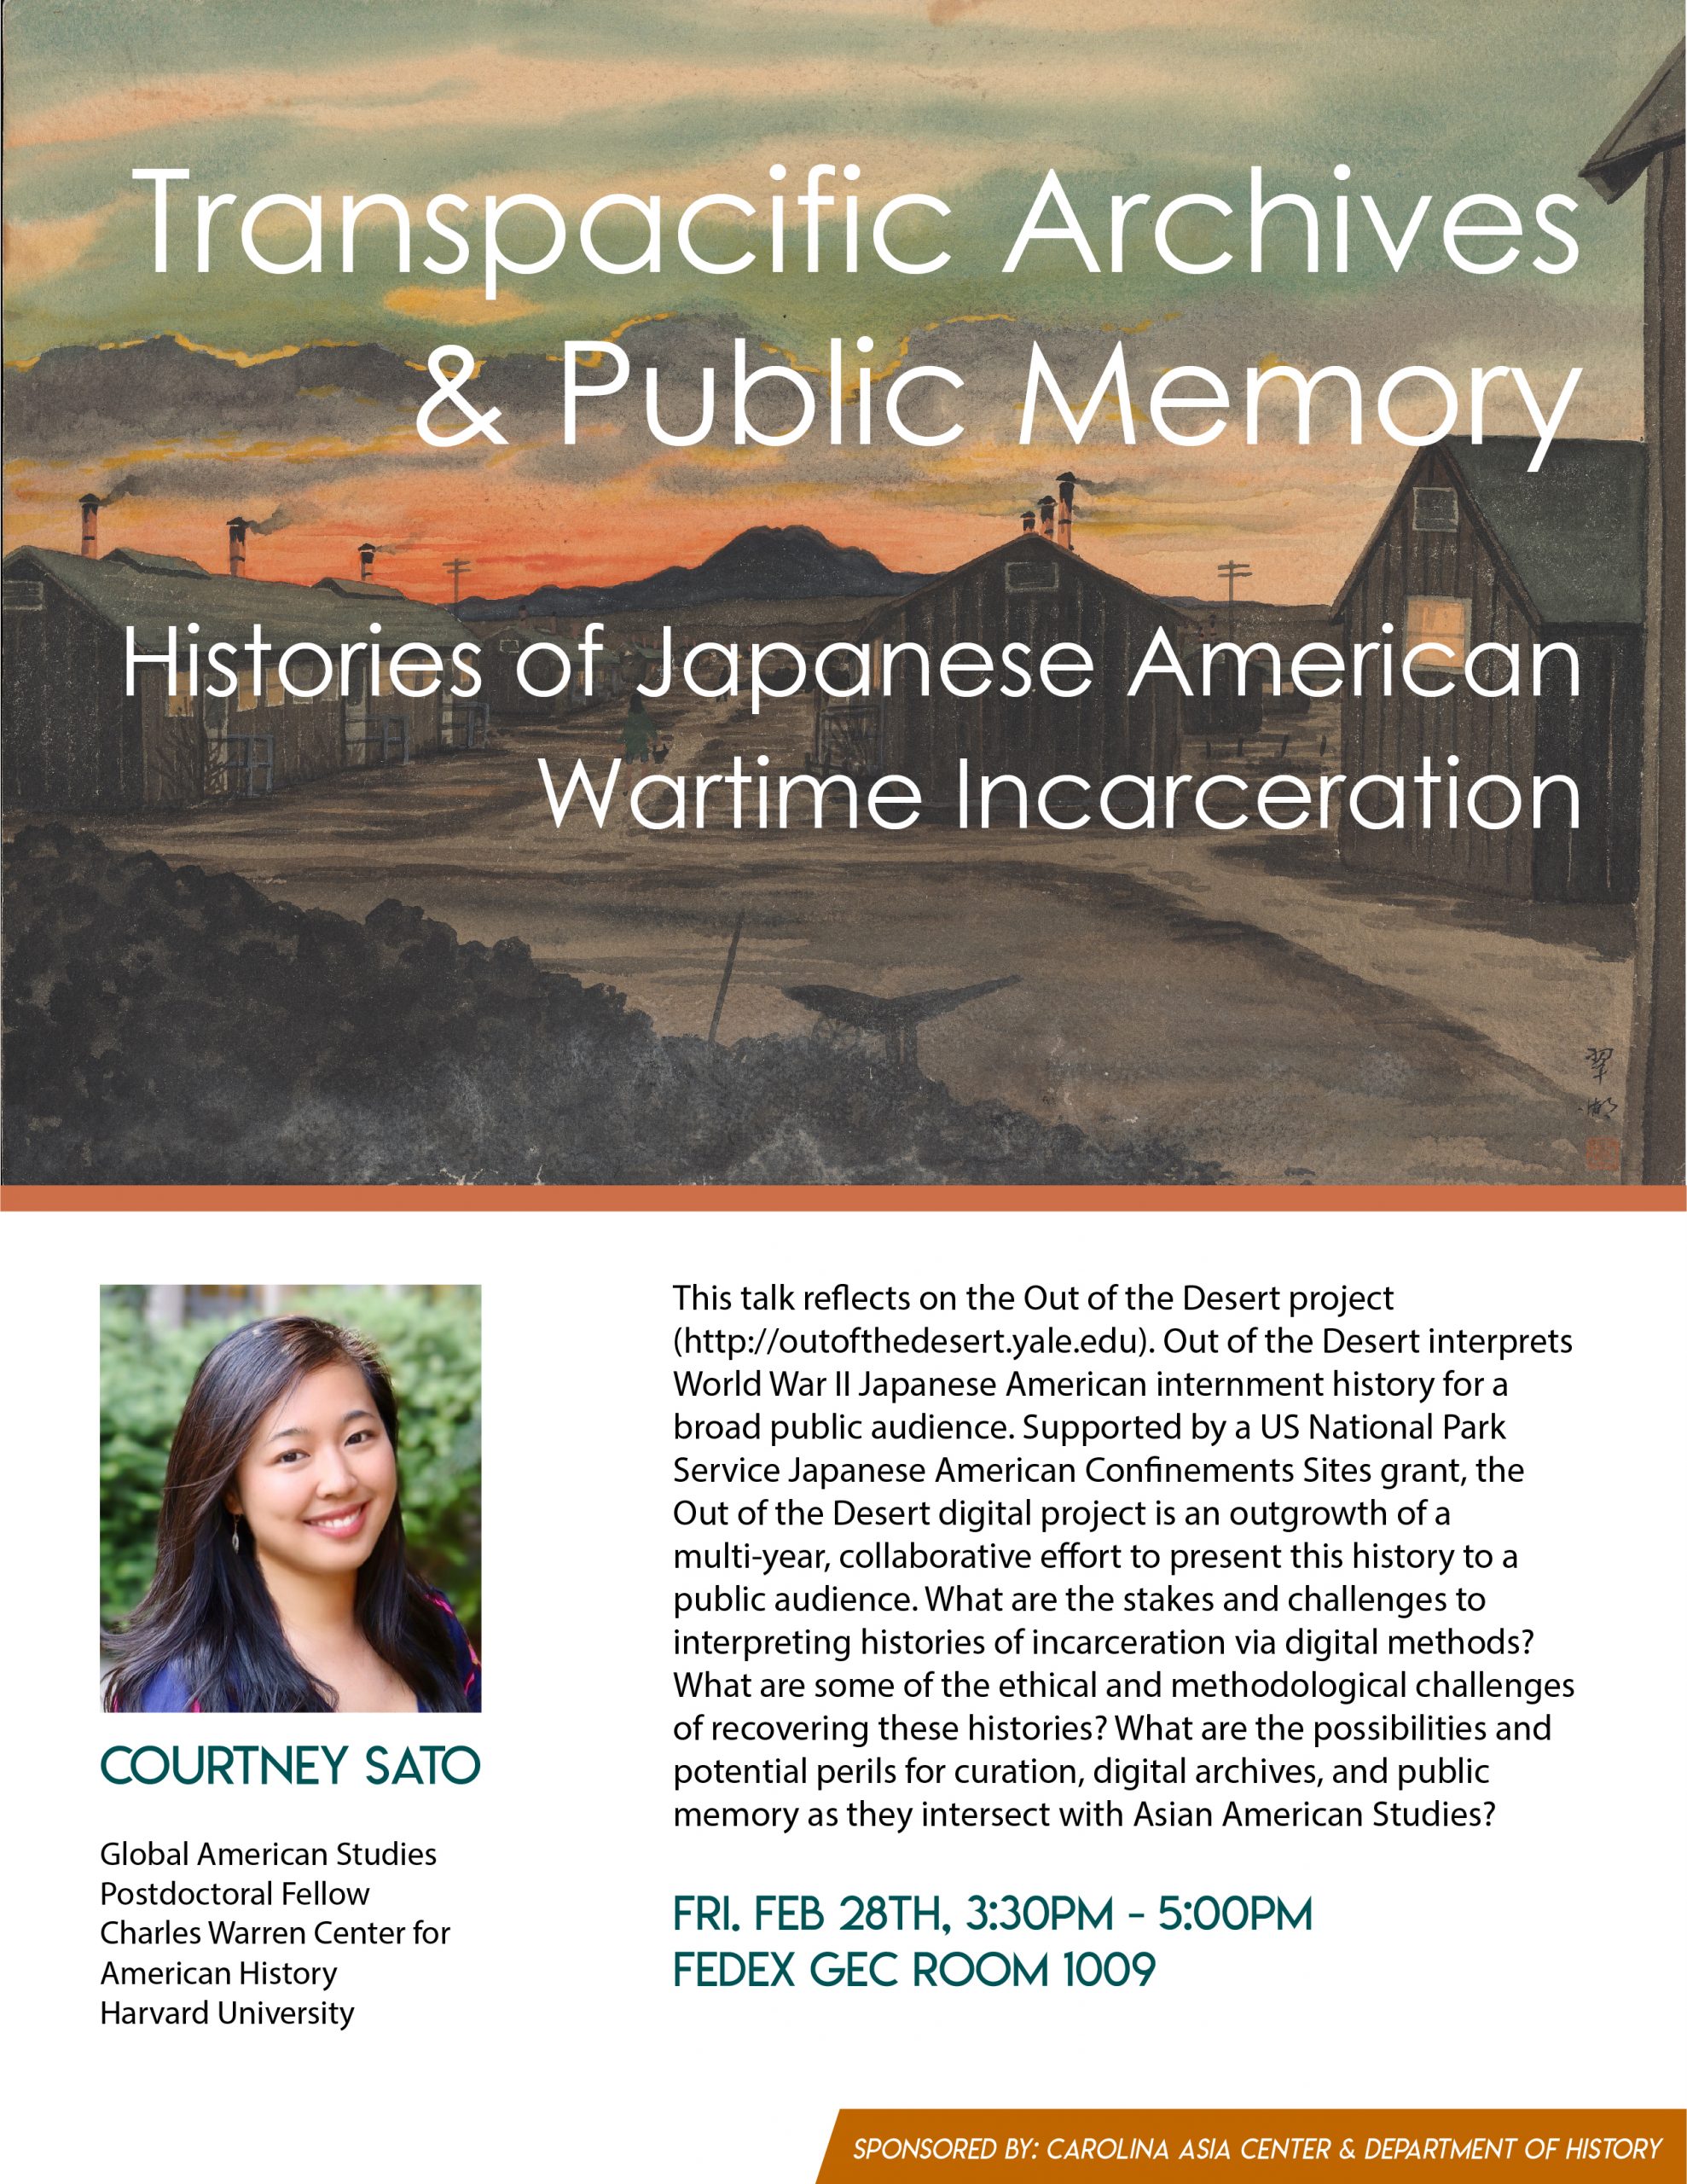 Transpacific Archives and Public Memory: Histories of Japanese American Wartime Incarceration